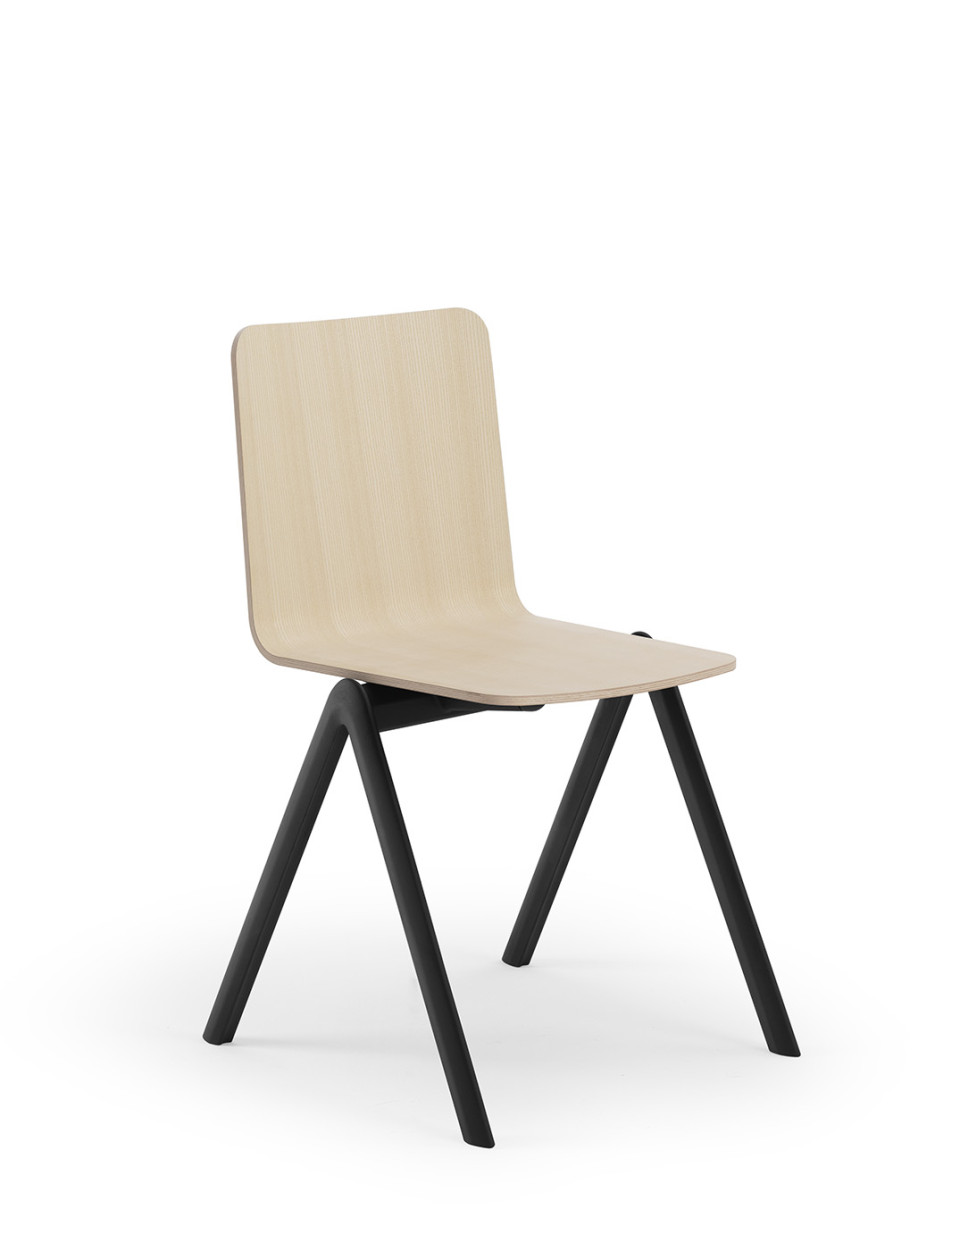 Stack chair with wooden seat